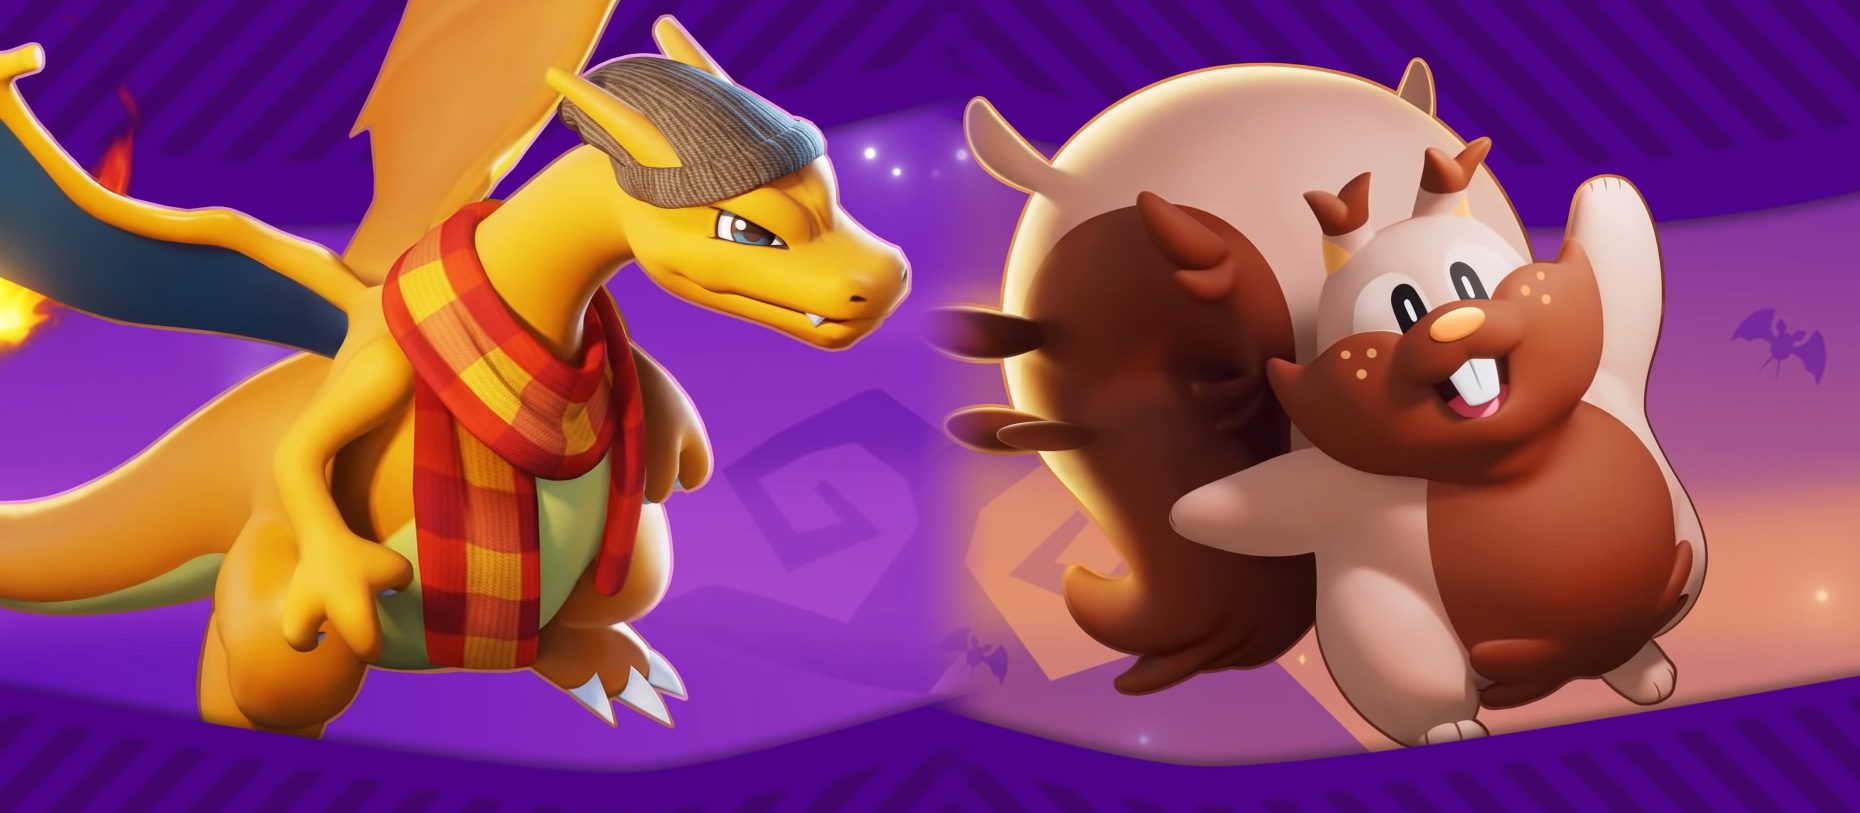 For Halloween, Pokemon Unite is getting Greedent and a smug Charizard